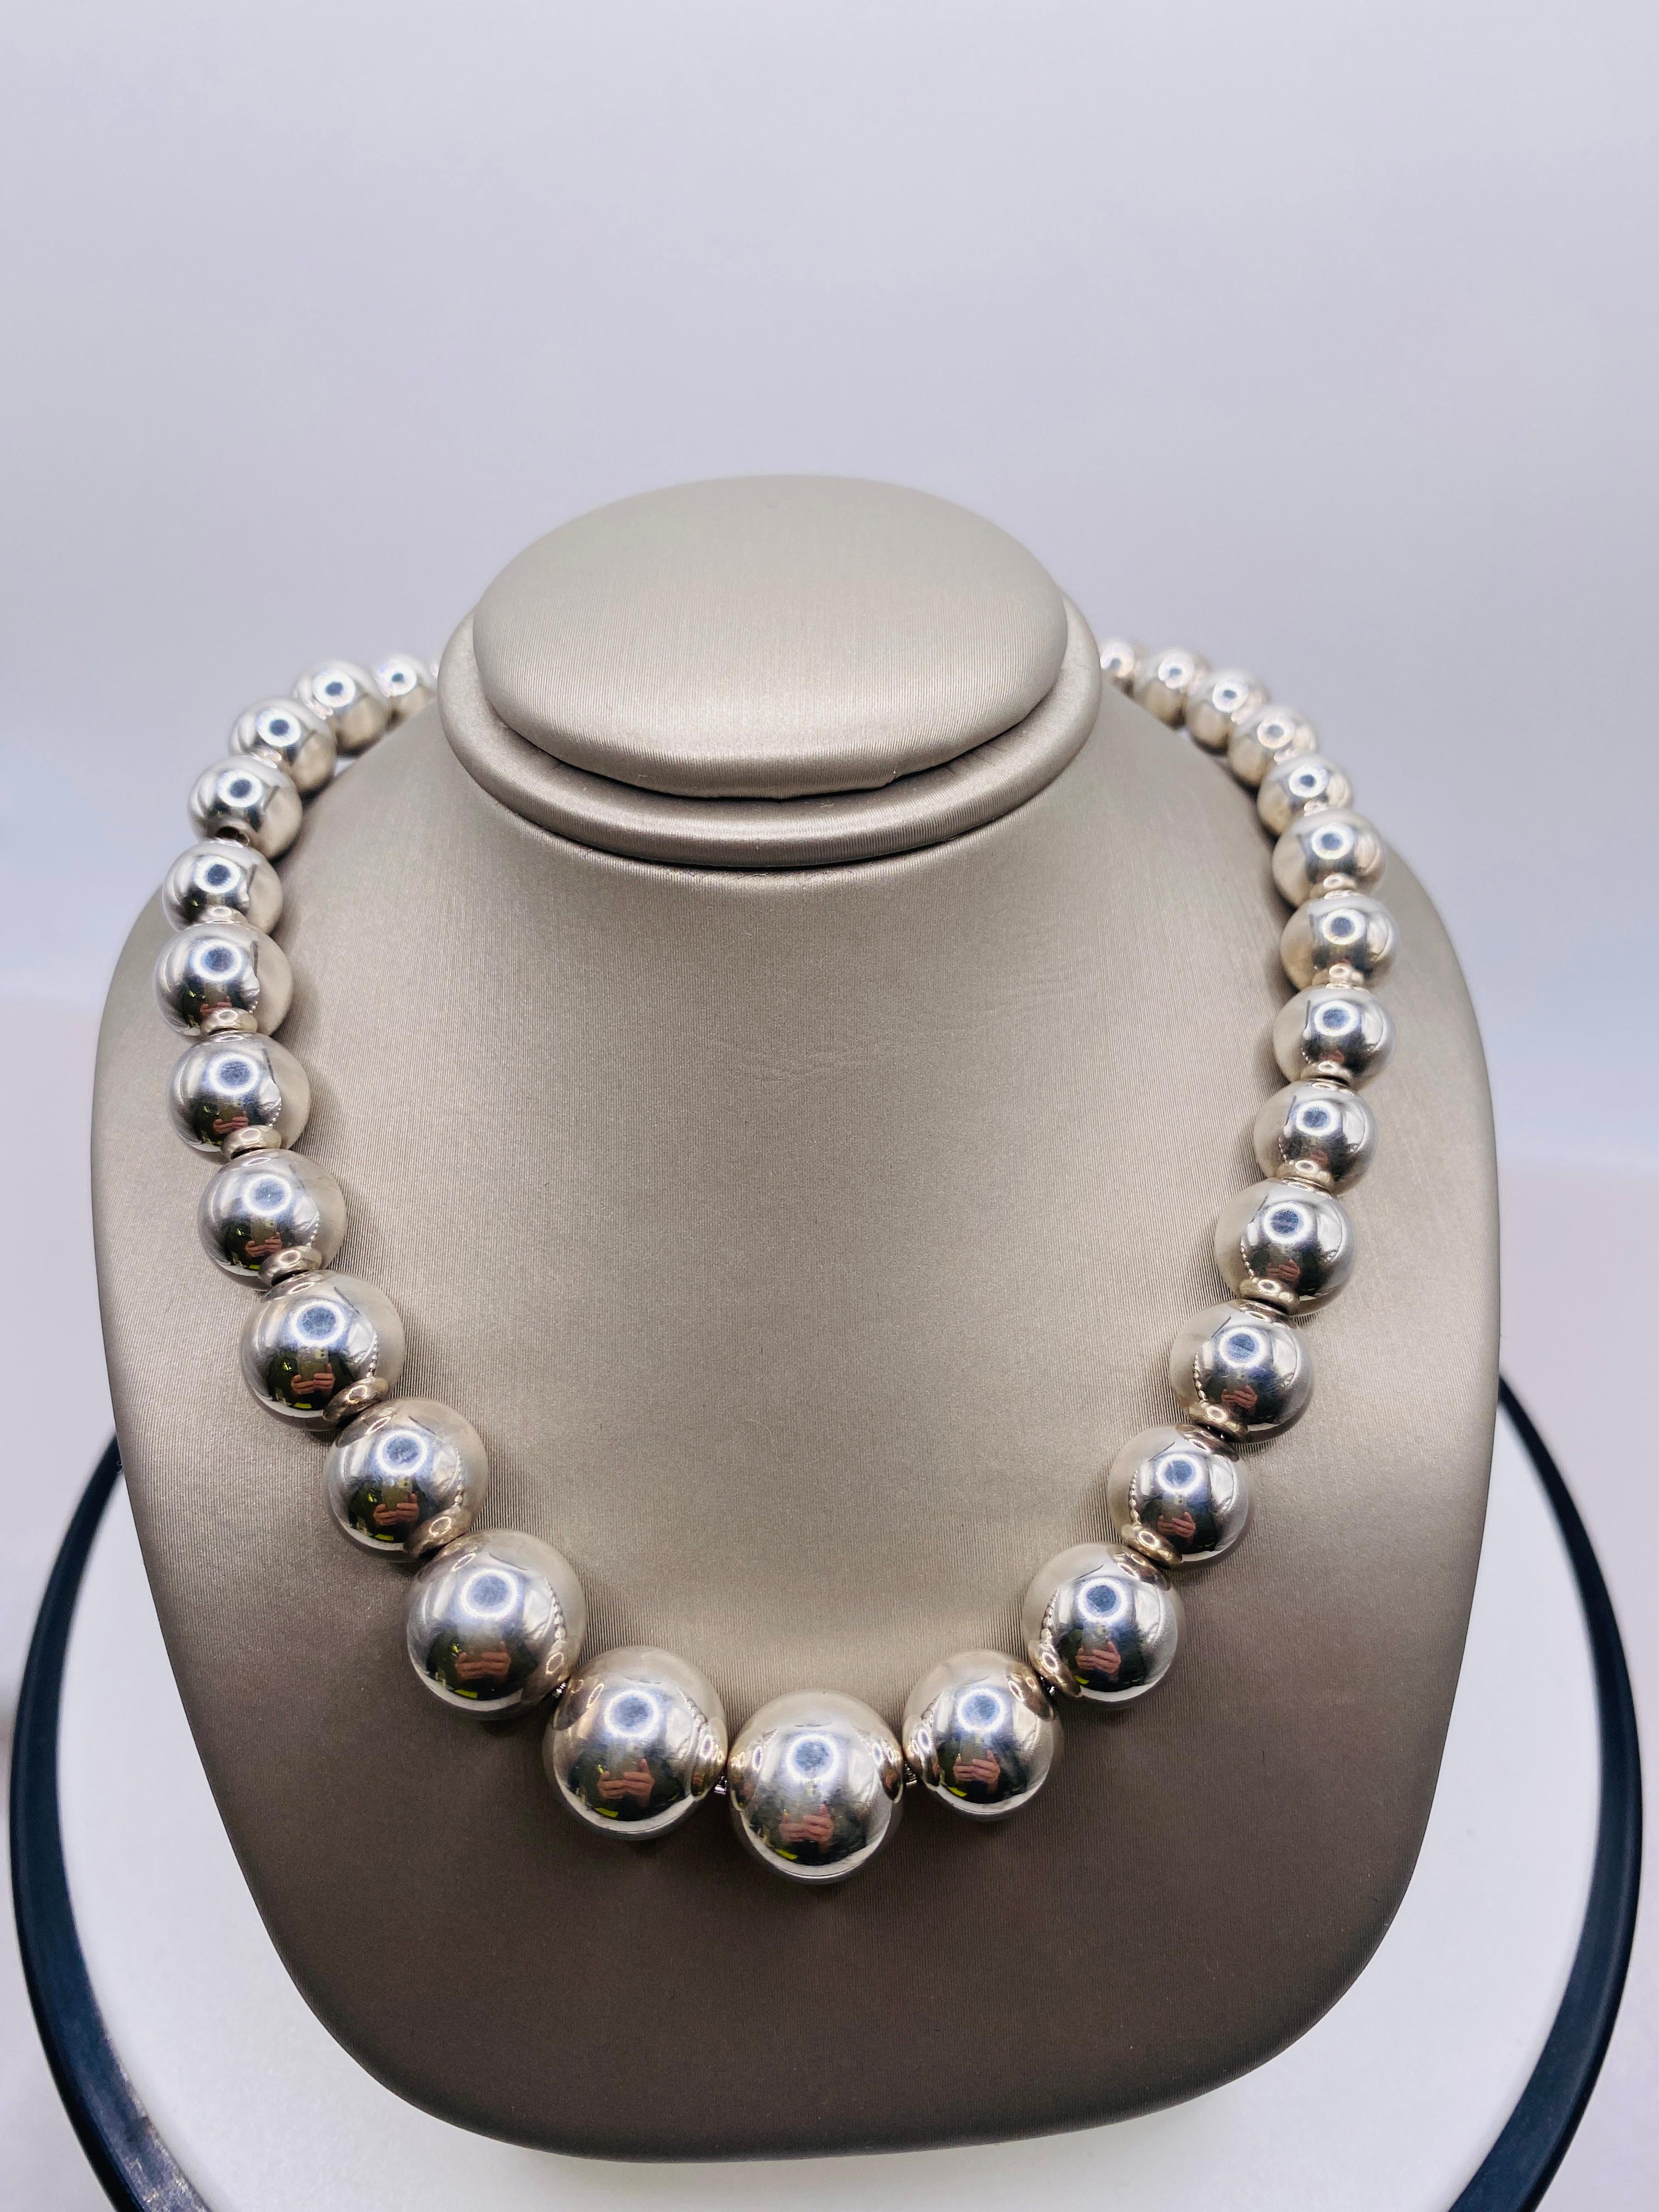 Tiffany & Co. 925/Sterling Silver 6-11mm Ball Bead Graduated Necklace 14.9Dwt MSRP 750